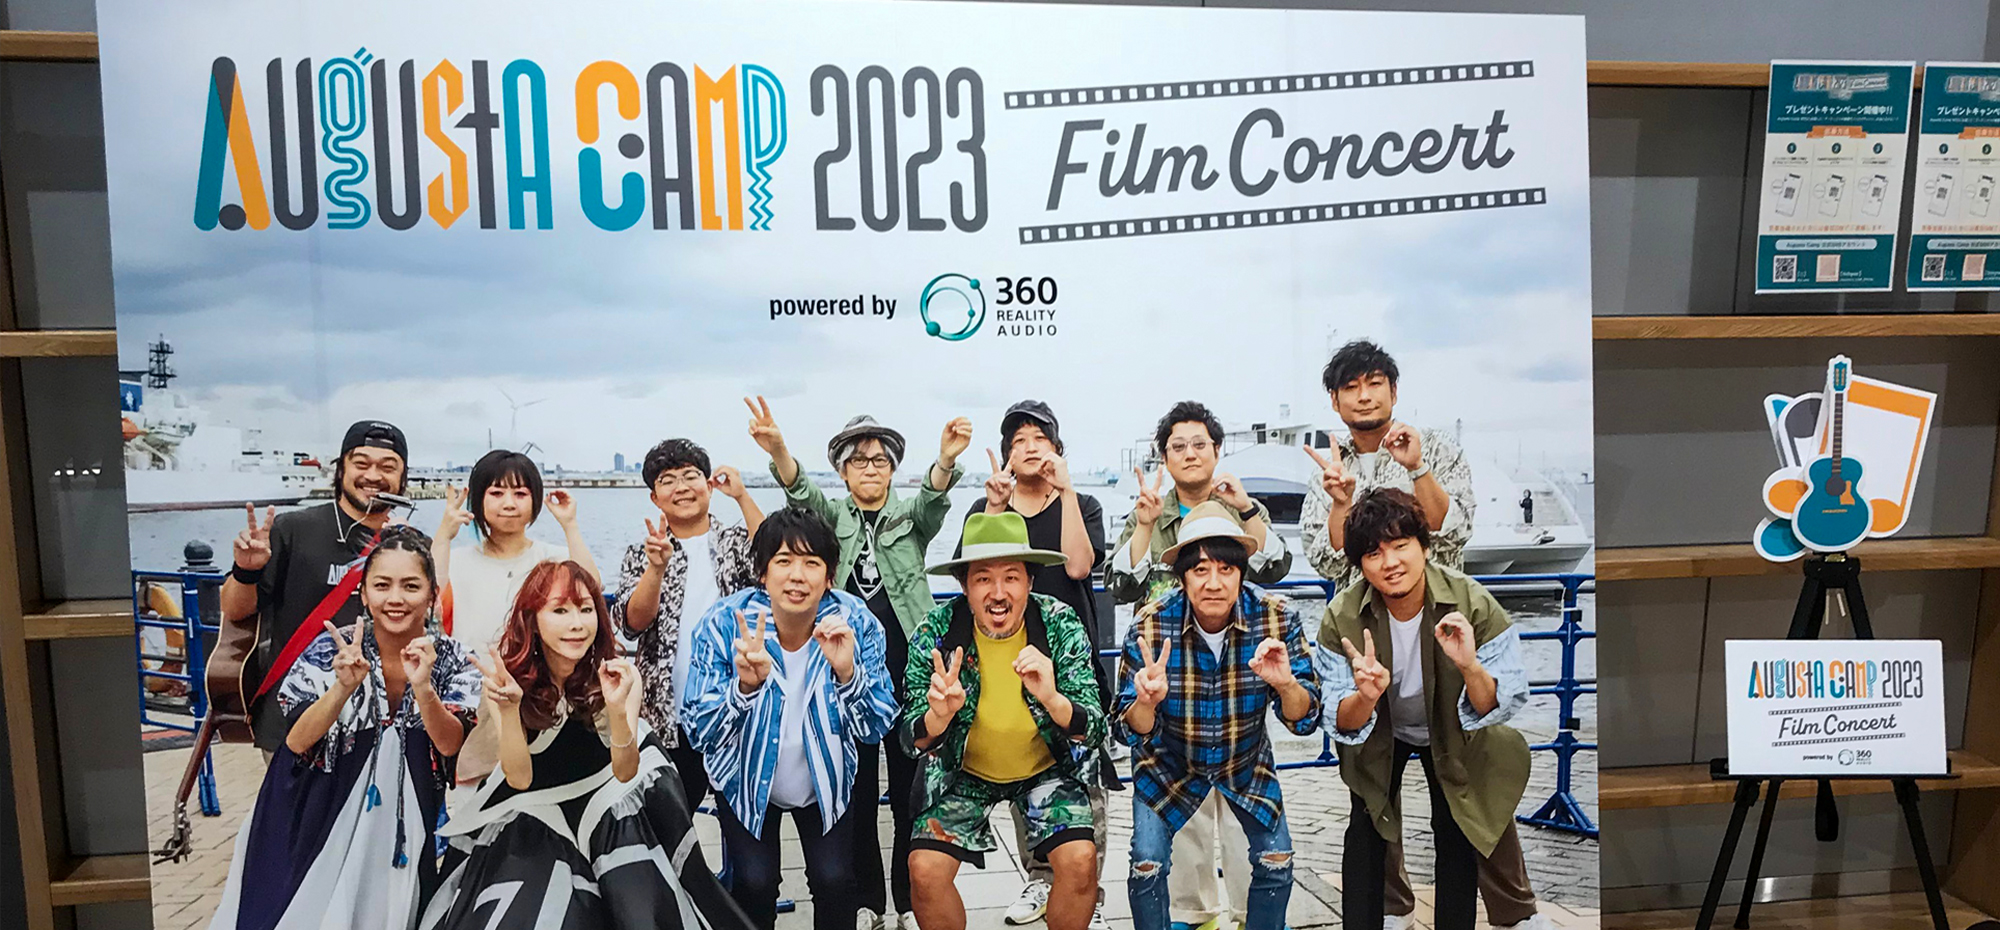 Augusta Camp 2023 Film Concert powered by 360 Reality Audio